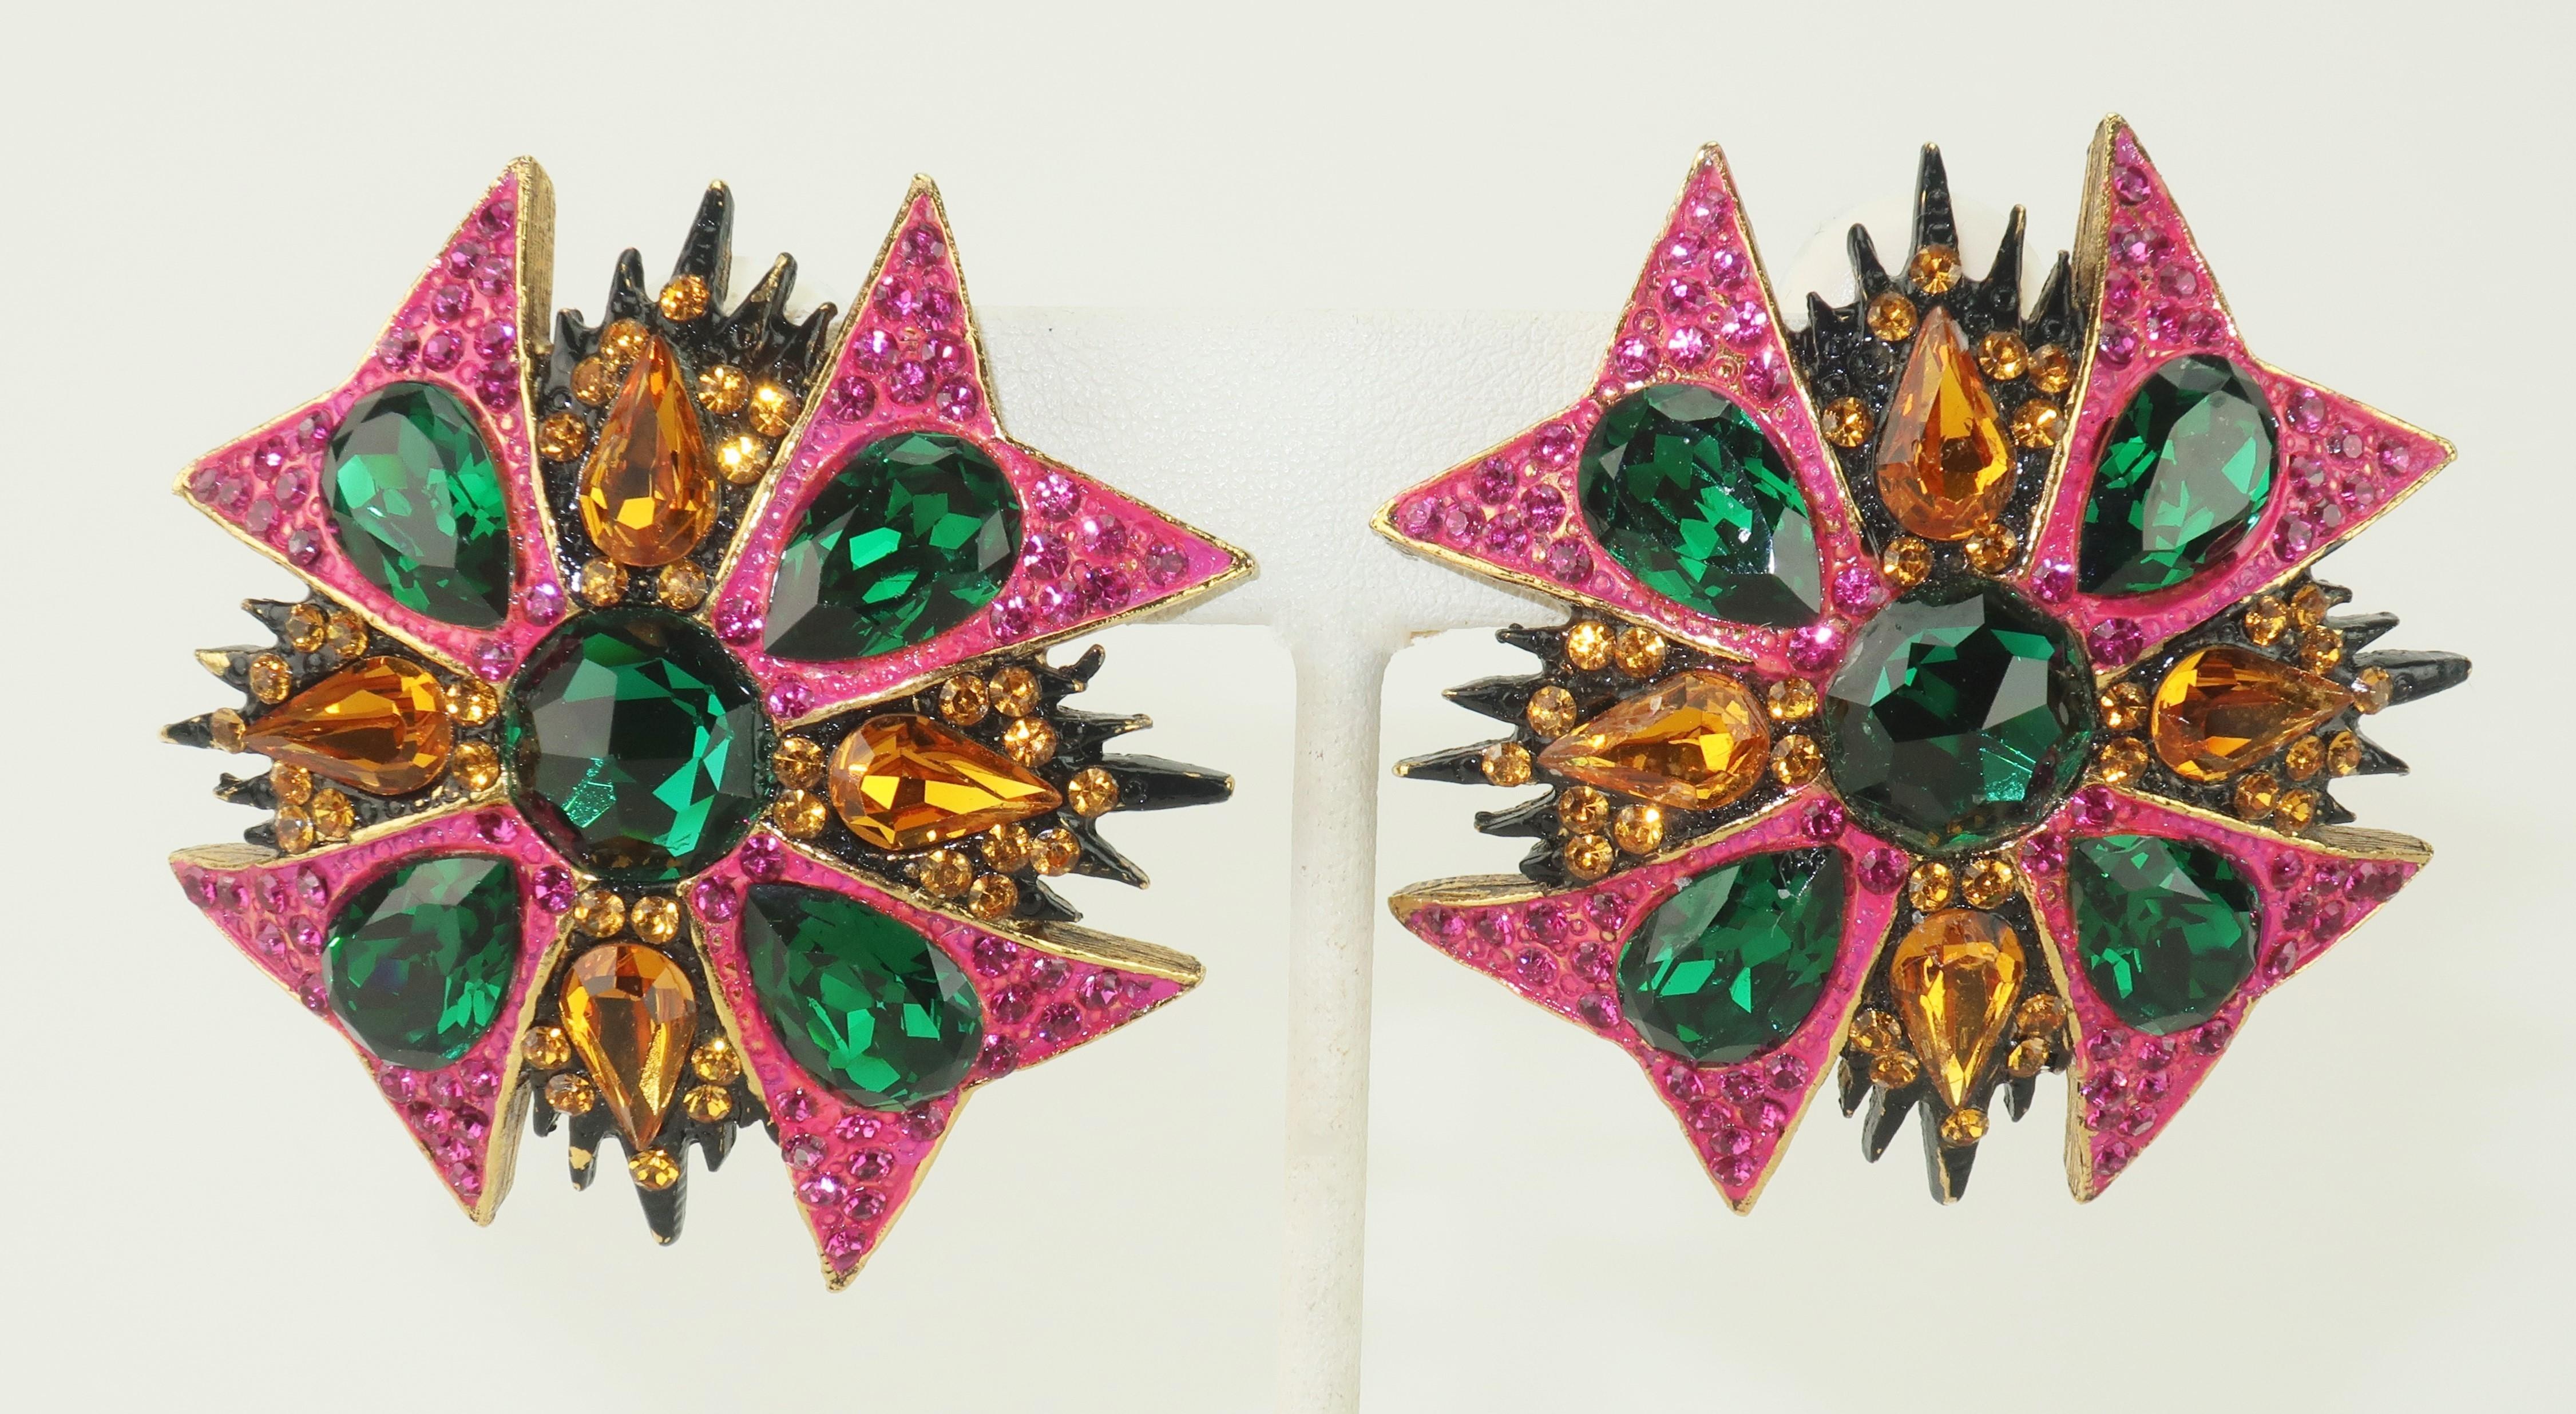 1980’s Jay Feinberg clip on earrings in a Maltese Cross inspired shape with emerald green, amber and hot pink crystal rhinestones set in an antiqued gold tone metal accented with black and hot pink enameling.  Both earrings are signed at the back